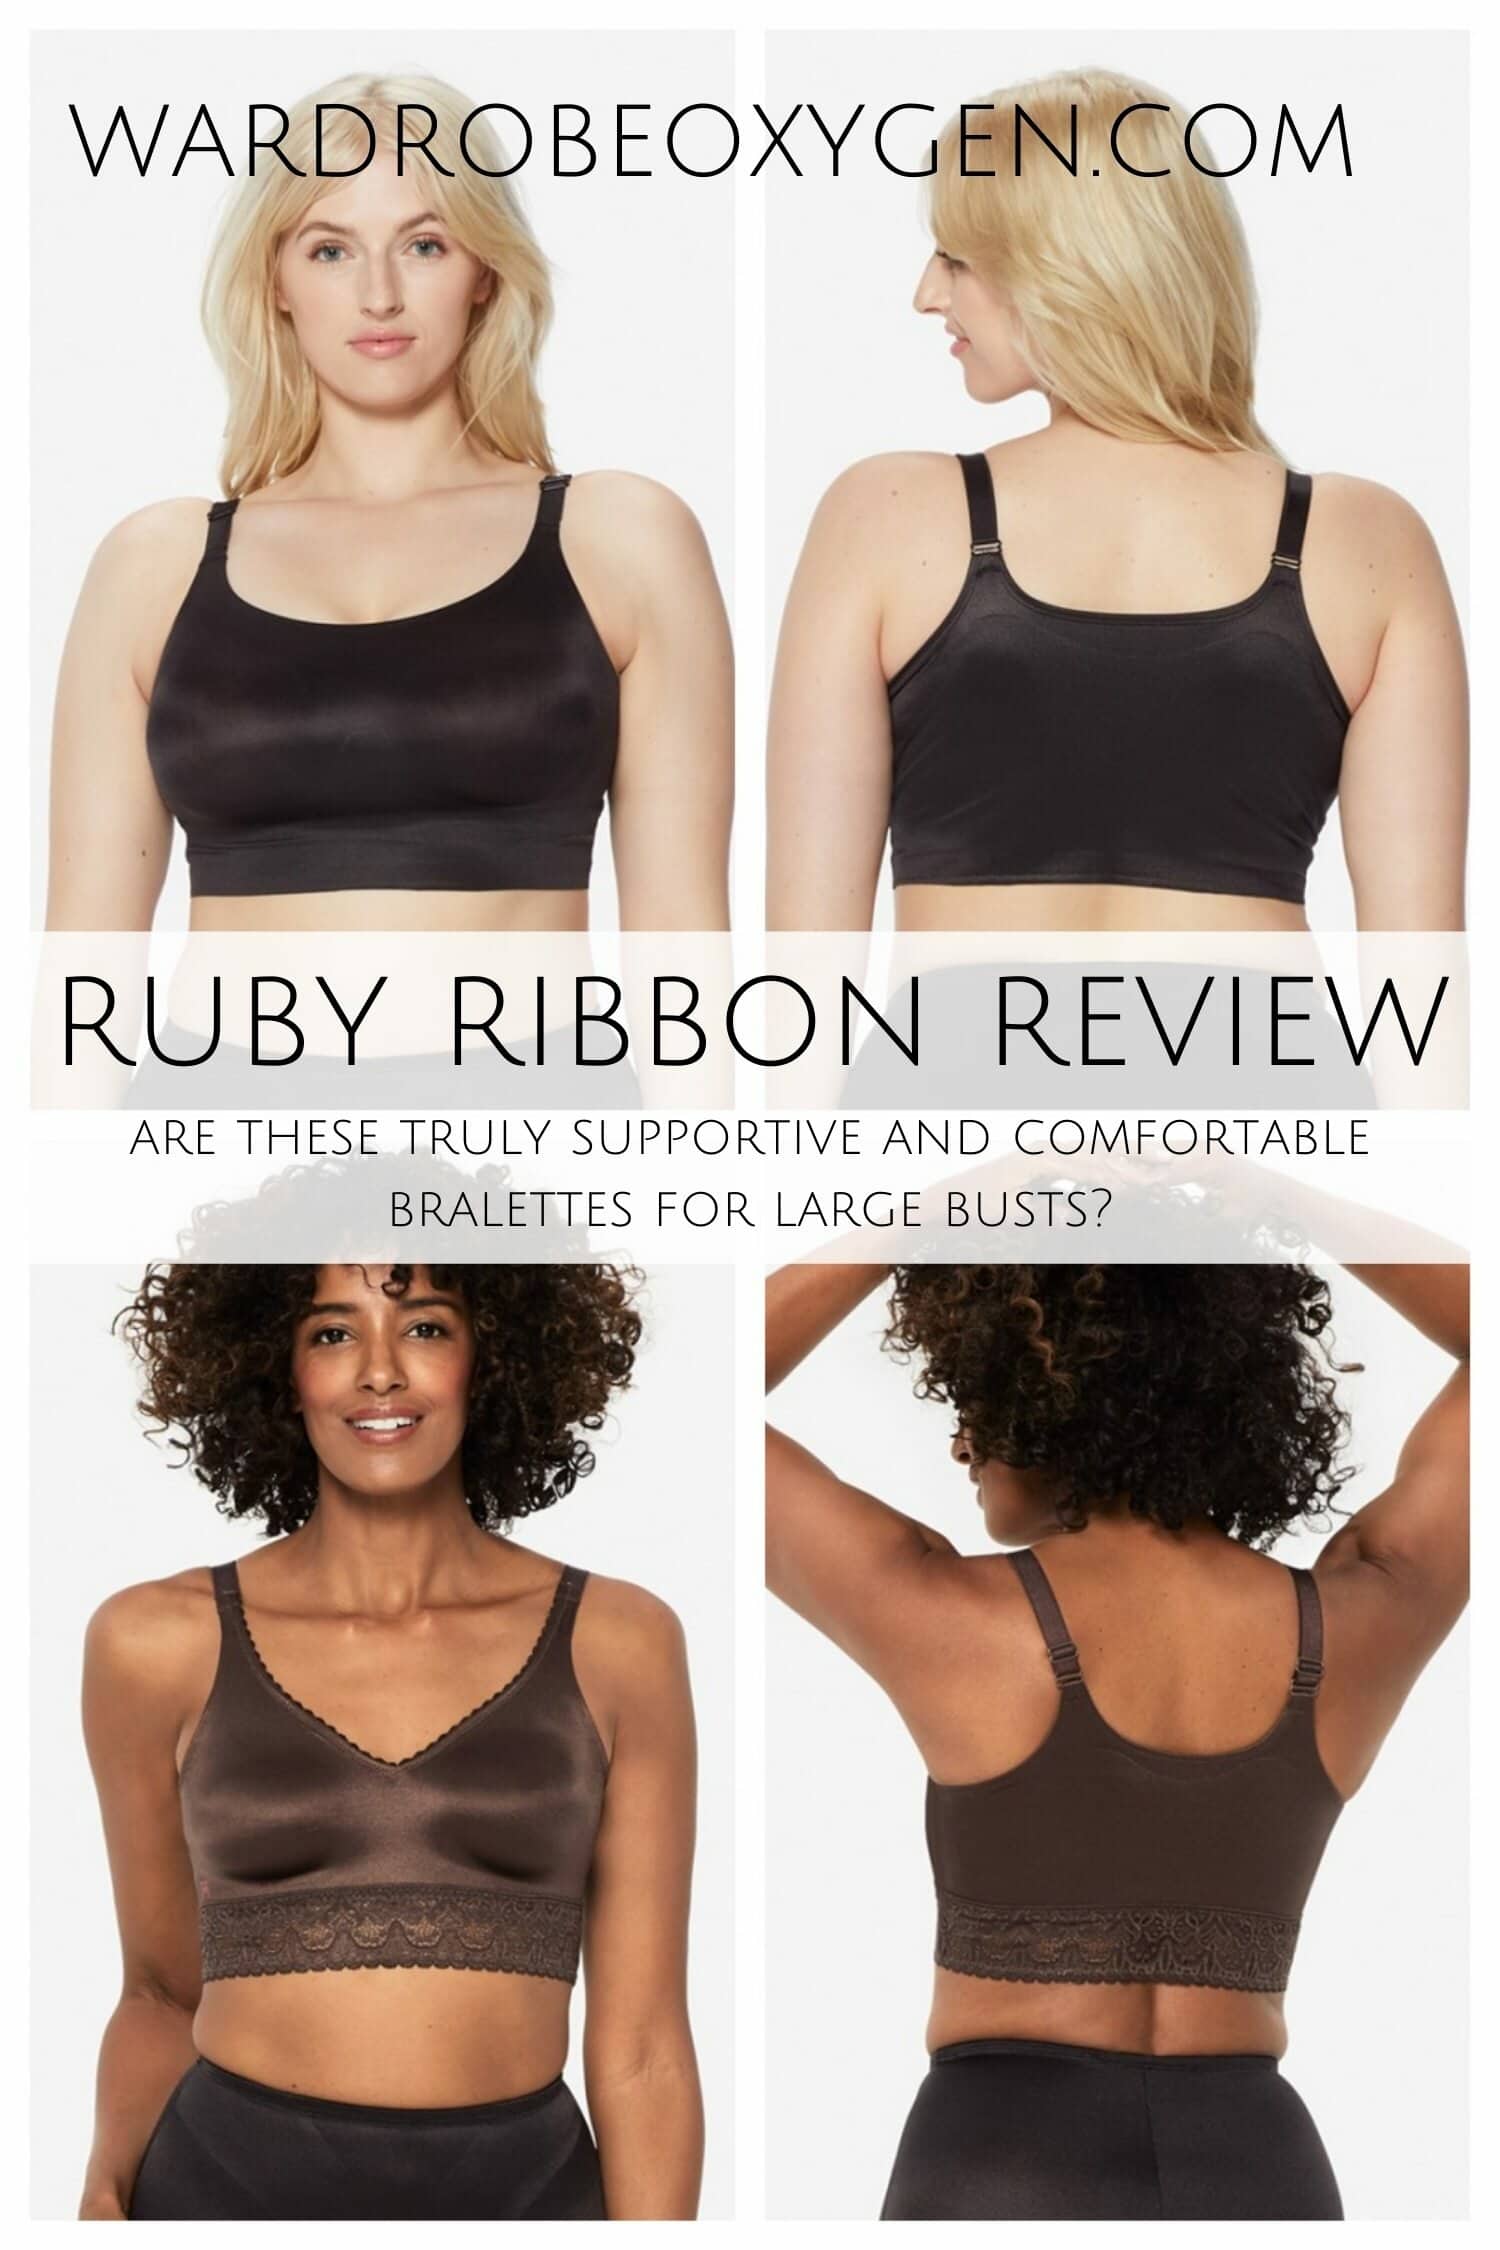 check out number 5 i have never found a bra that has that center piece  lay flat and my bras fit fine. is this a thing all big boobed women  experience or